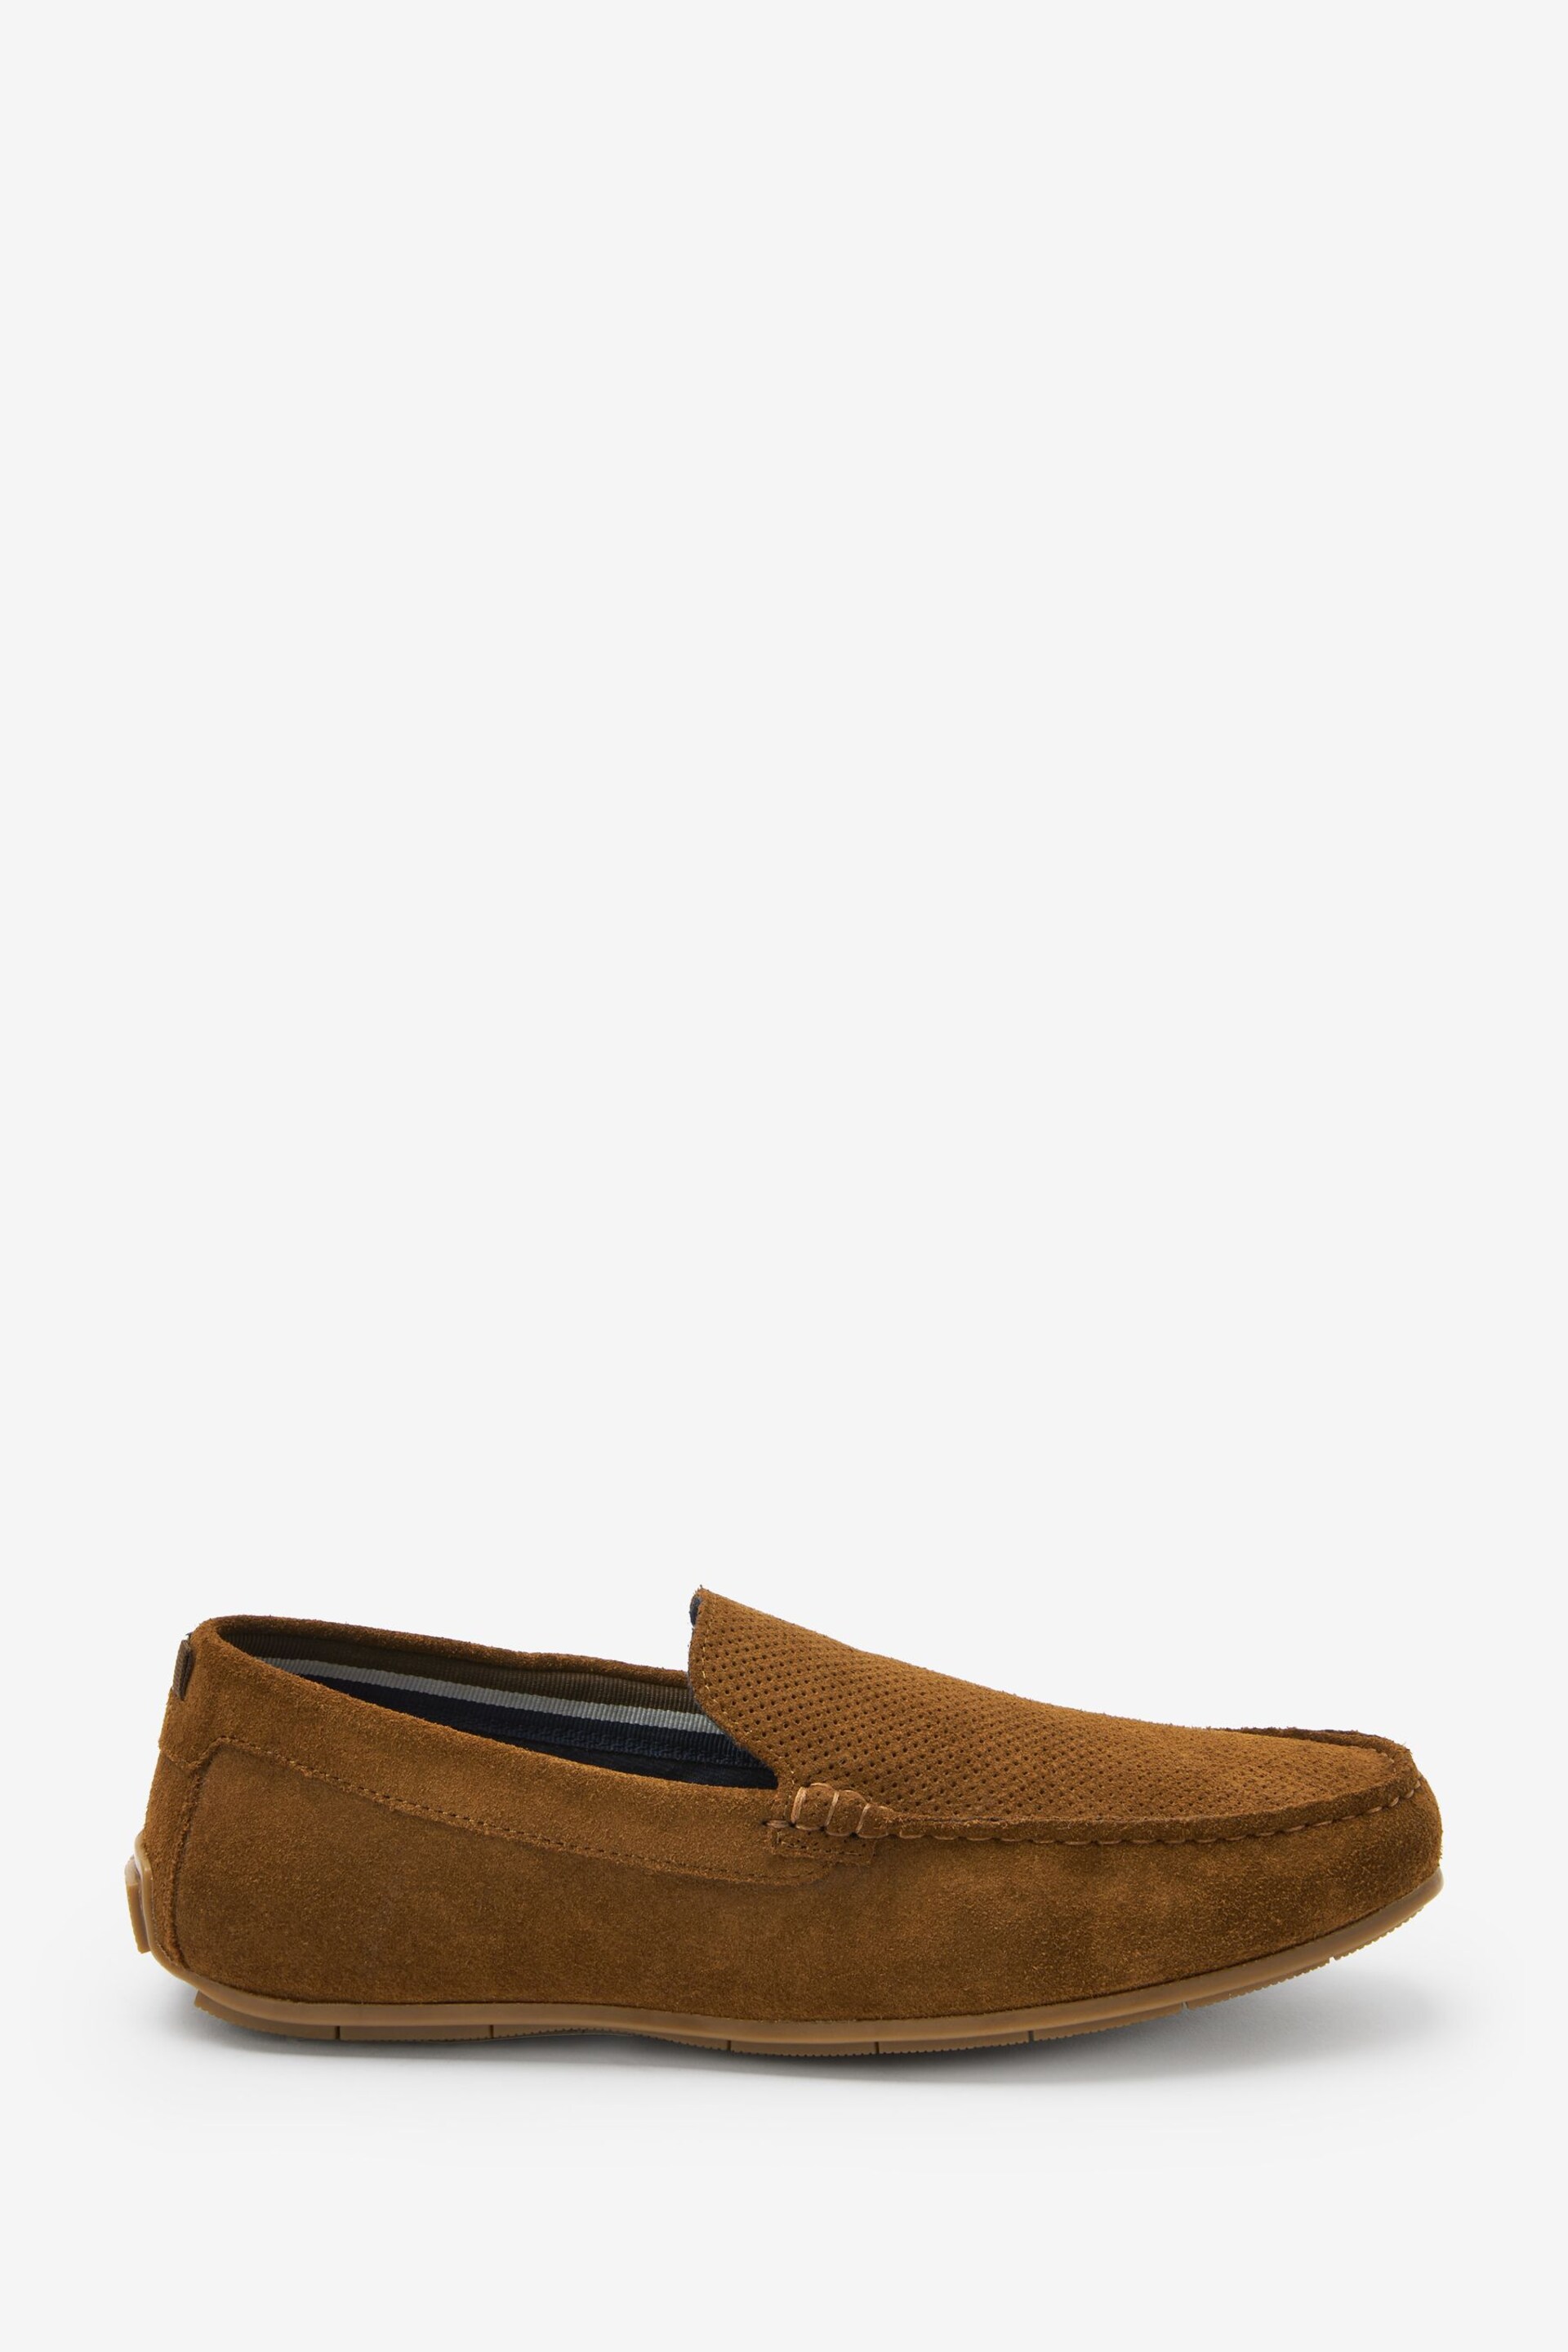 Tan Brown Suede Driver Shoes - Image 2 of 5